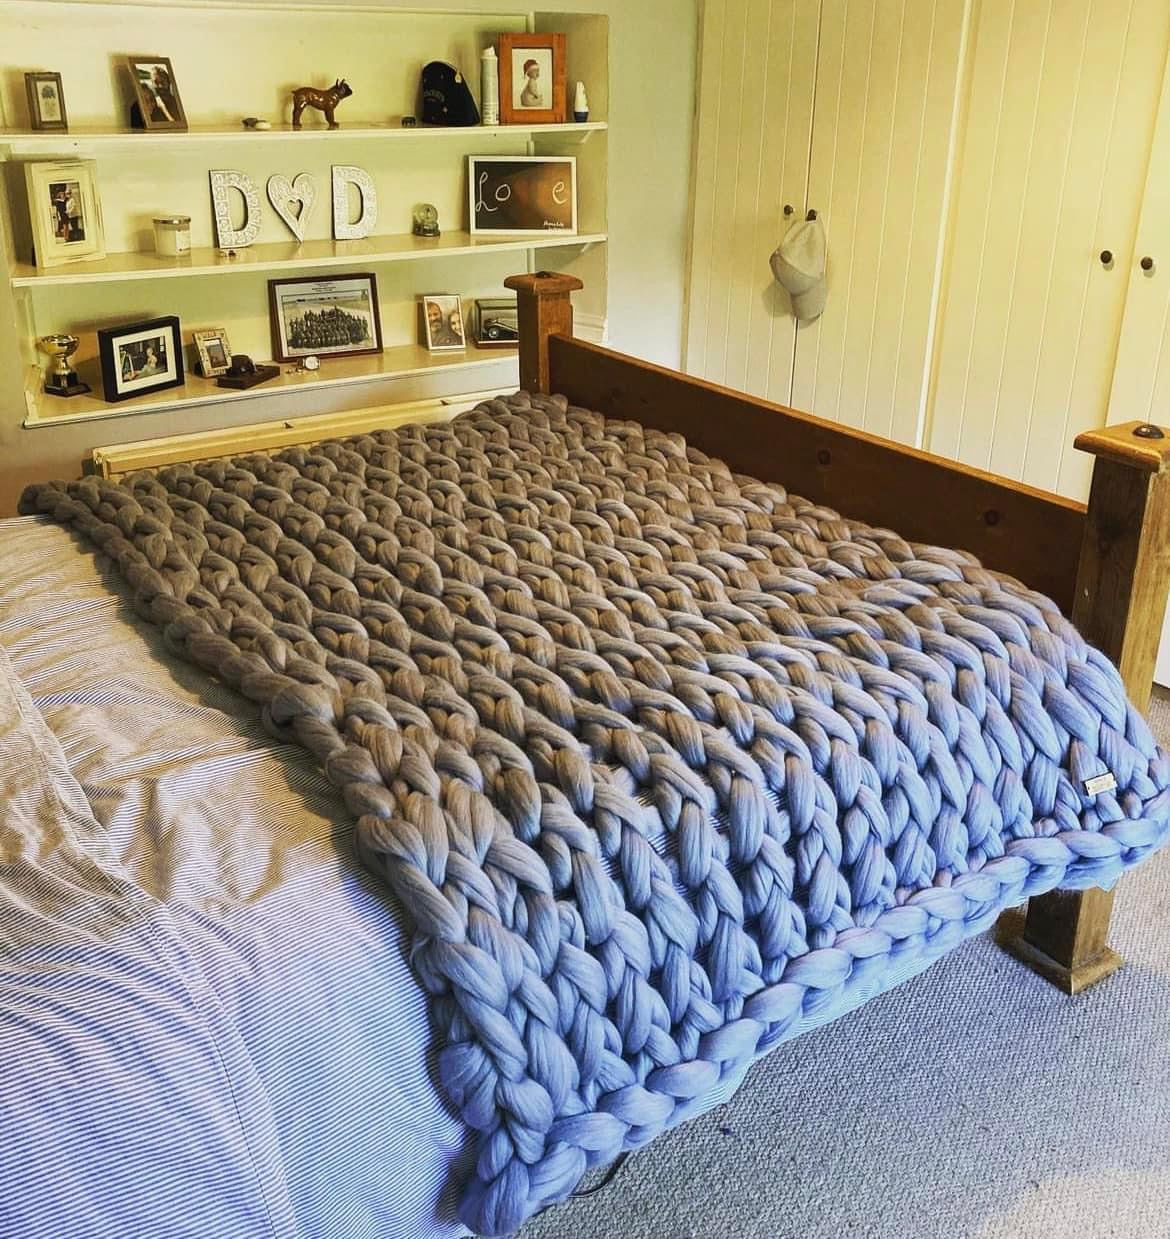 Large Arm Knitted Throw